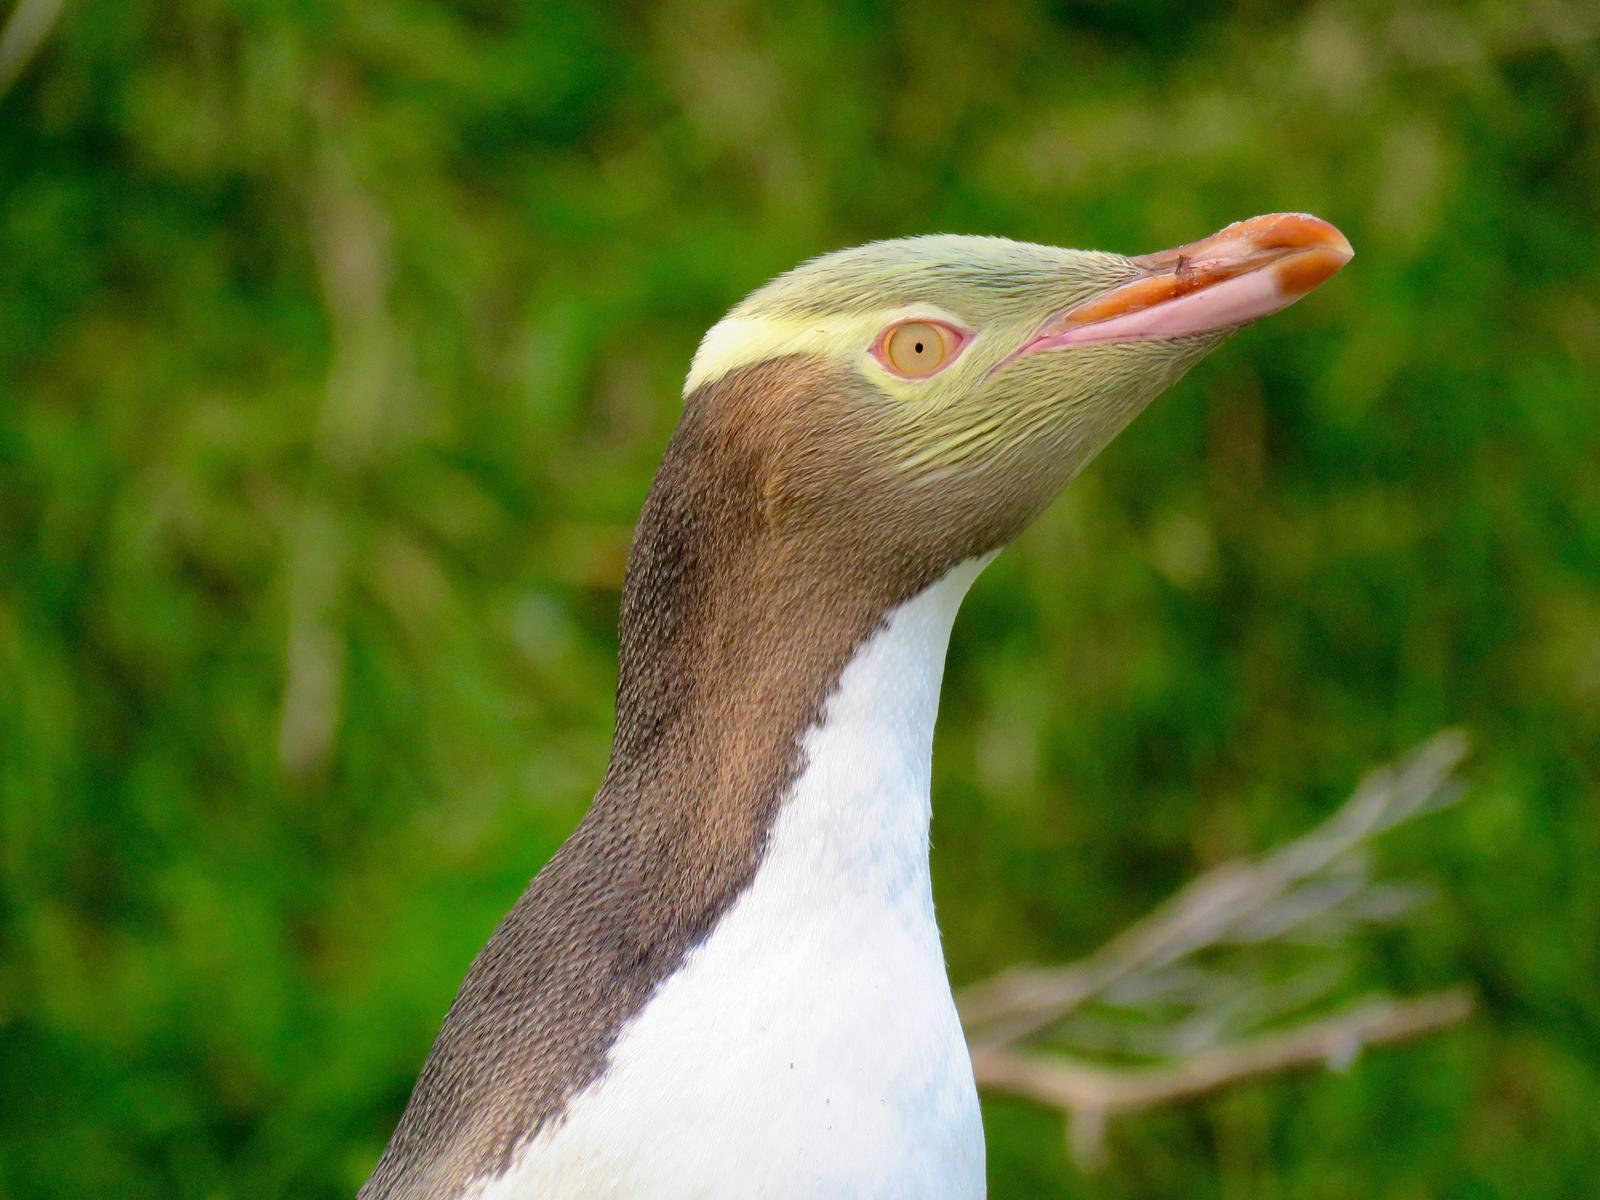 Yellow-eyed Penguin Photo by Lisa Owens